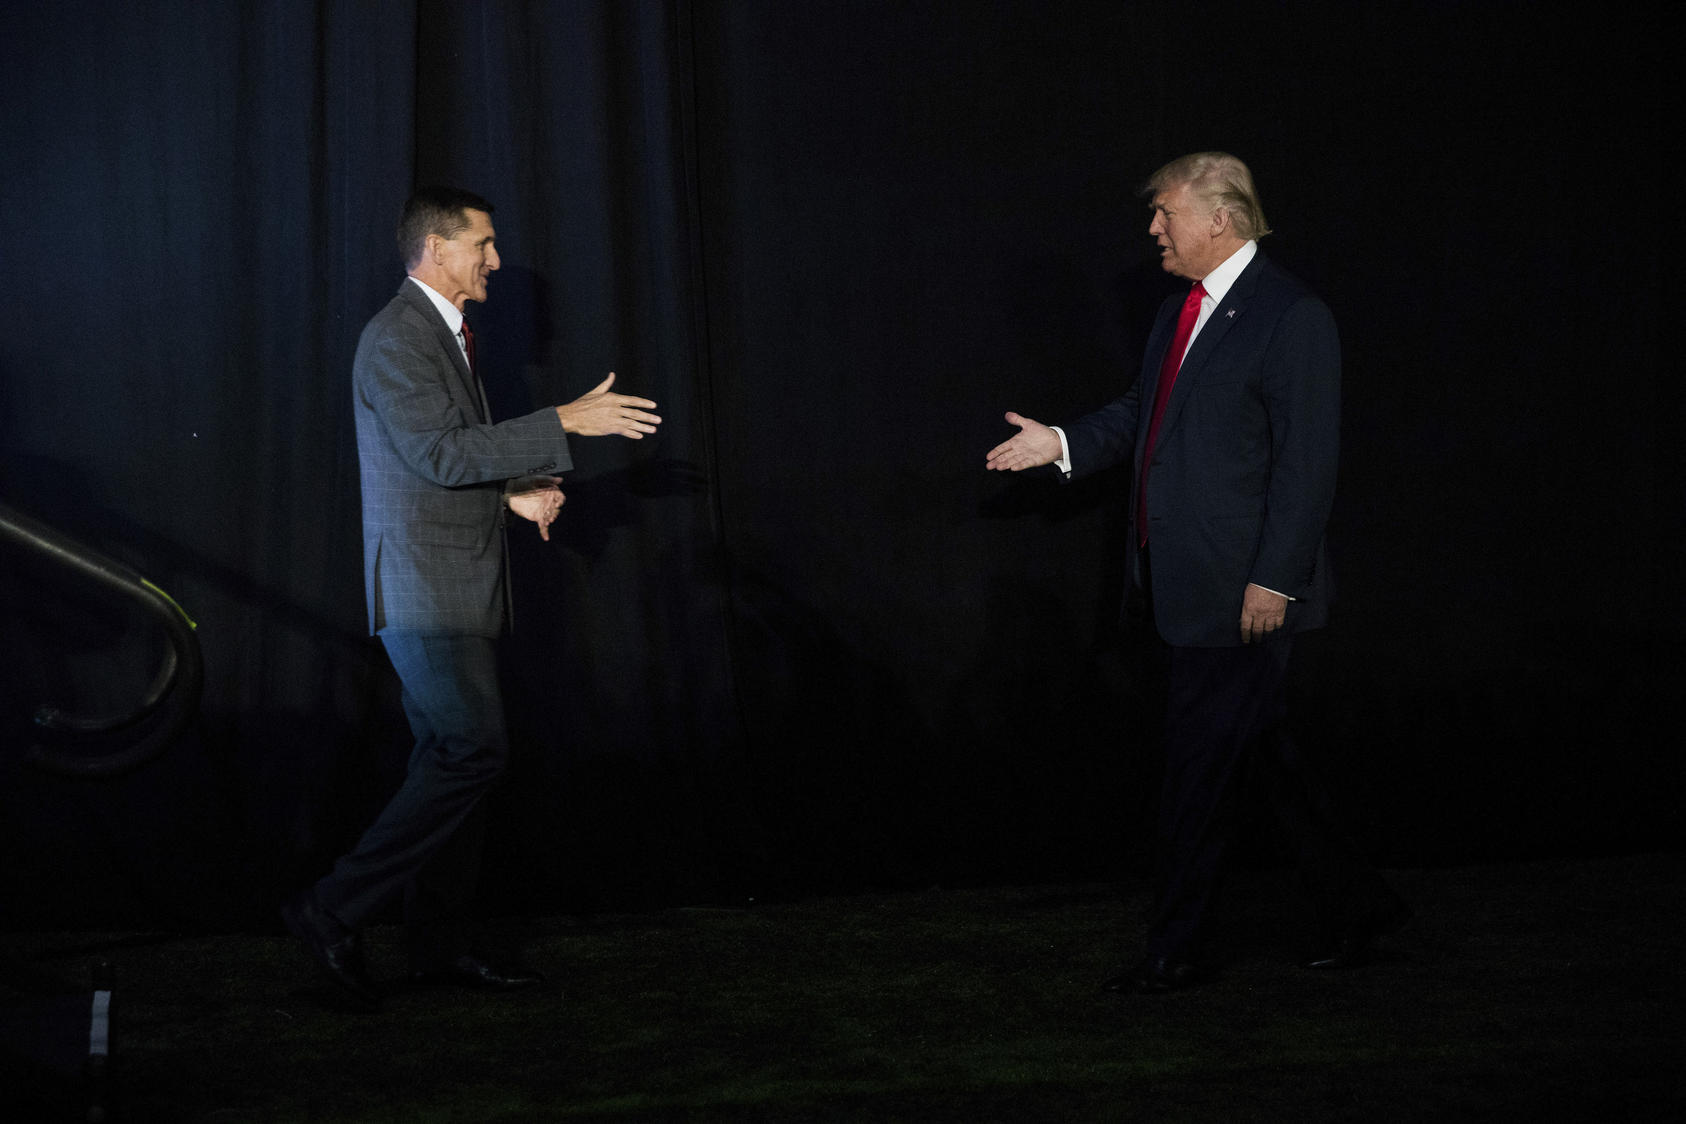  Lt. Gen. Michael Flynn introduces Donald Trump at a campaign event in Bedford, N.H., Sept. 29, 2016. Flynn -- Trump's pick for national security adviser -- had a brilliant military career, but turned out to be a catastrophic manager and is today regarded by foreign policy specialists from across the political spectrum as a kook, Nicholas Kristof writes. (Damon Winter/The New York Times)